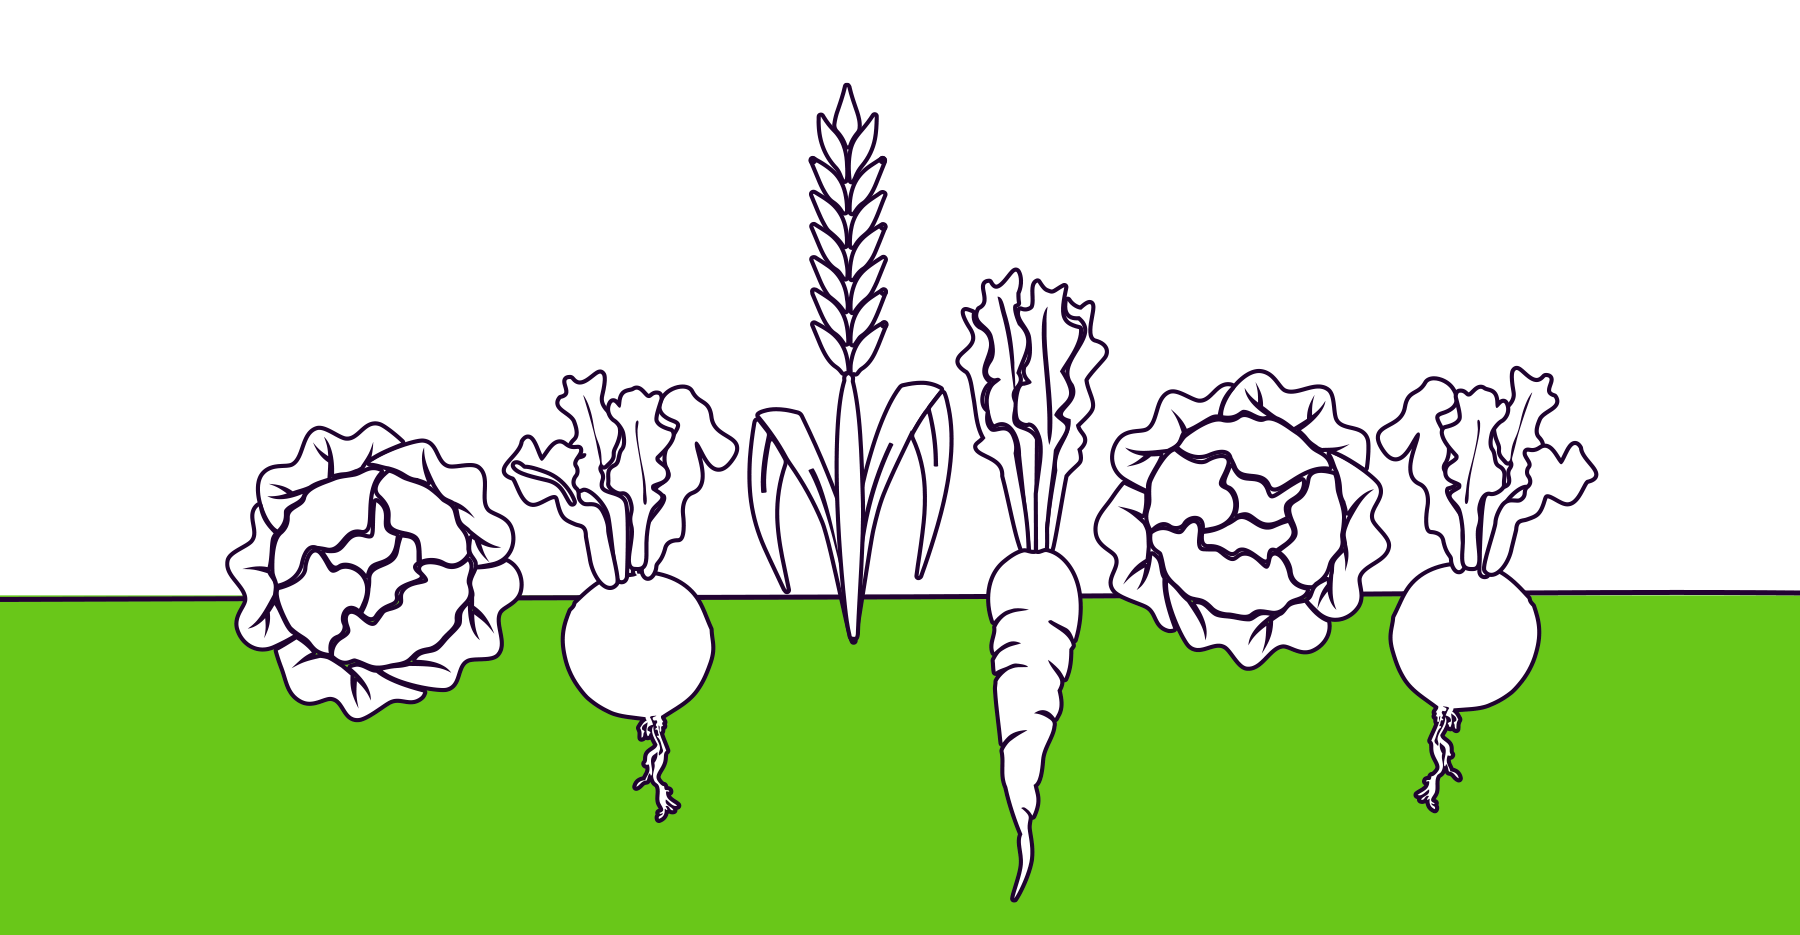 An illustration of some root vegetables over a green background